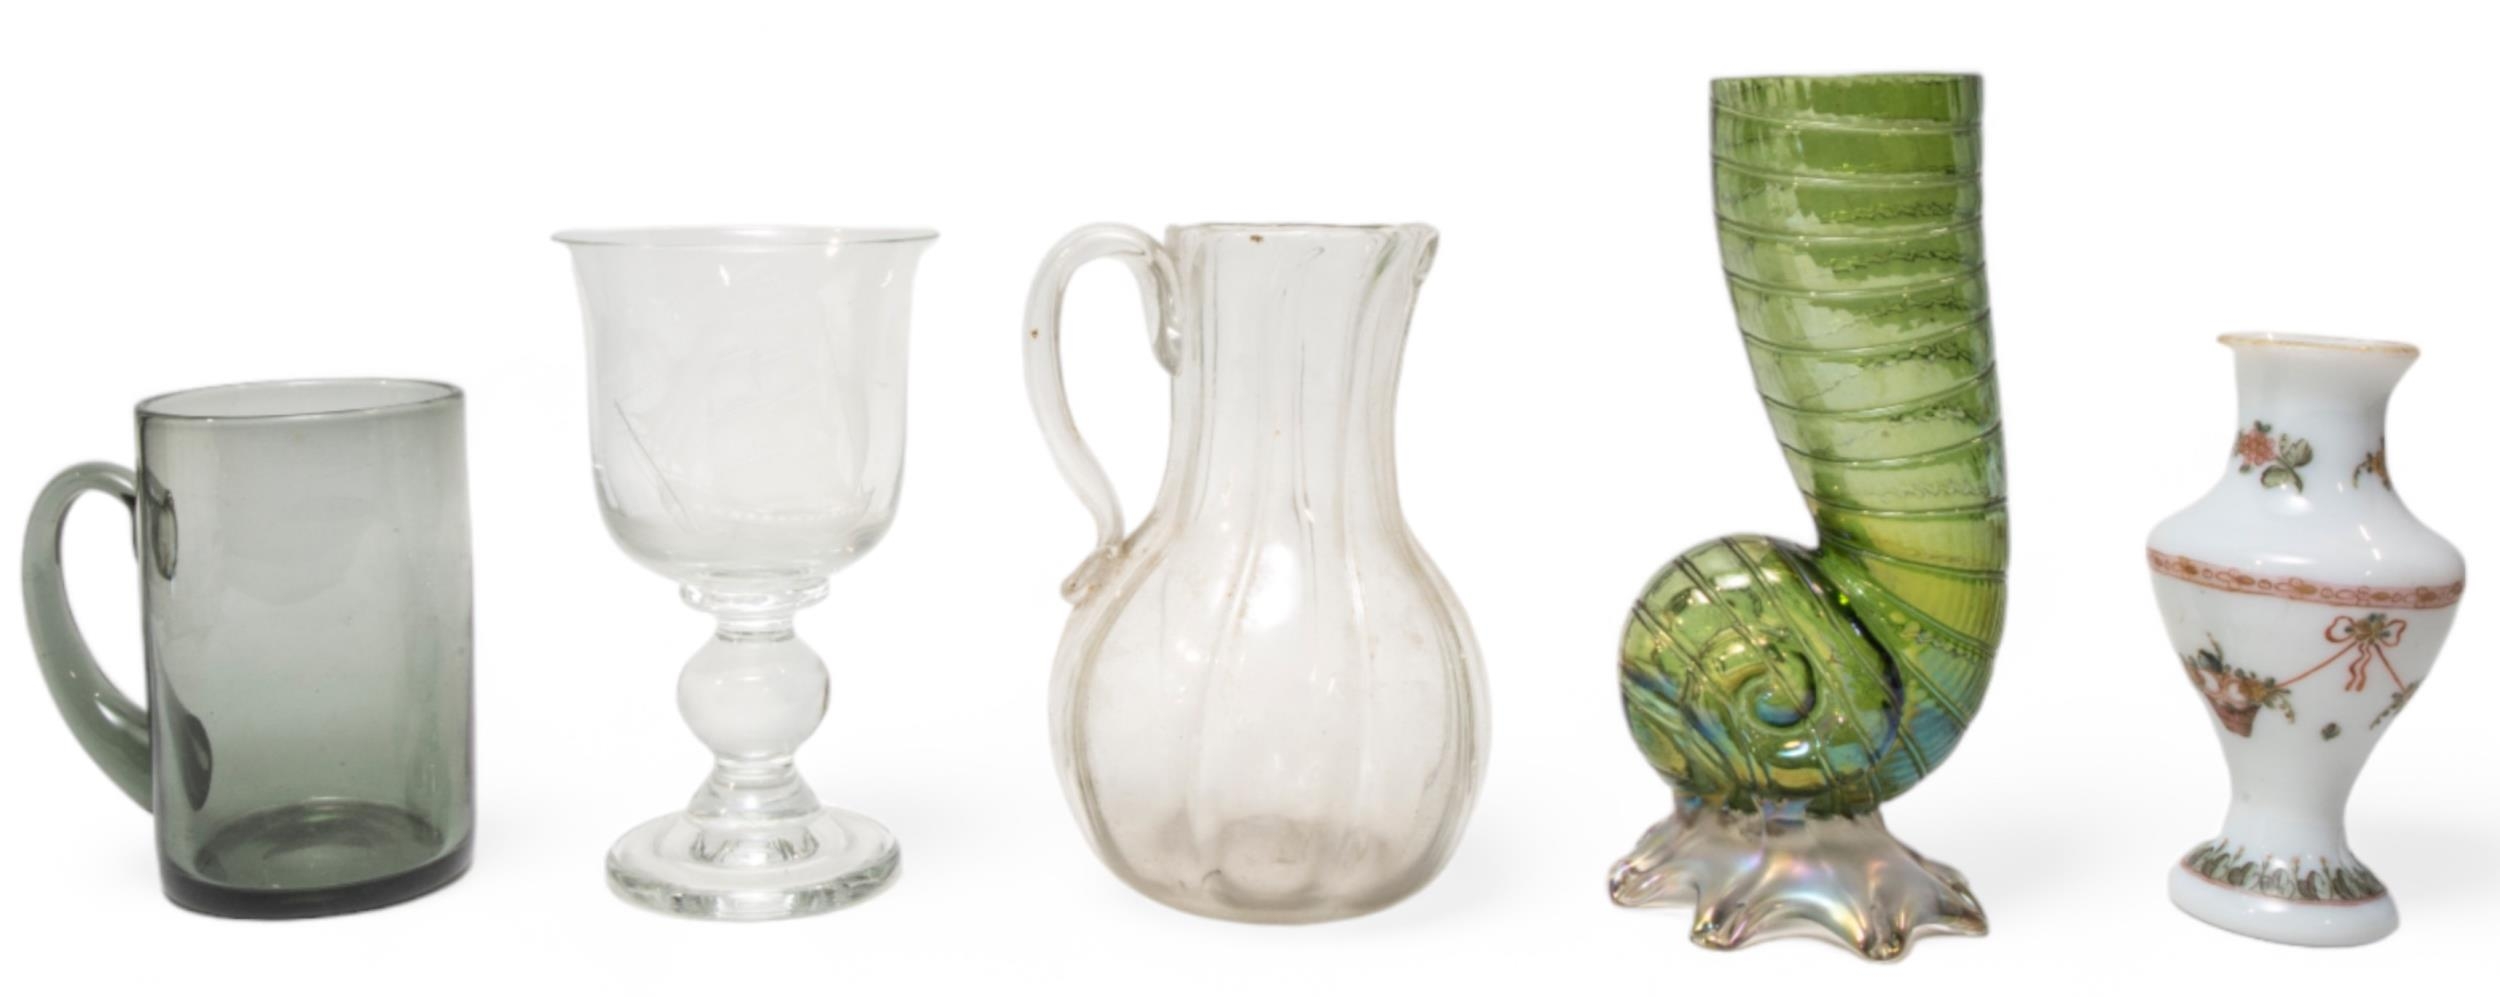 A MIXED GROUP OF GLASS WARE, PREDOMINANTLY 18TH/19TH CENTURY, the lot includes a conch form vase, - Image 2 of 6